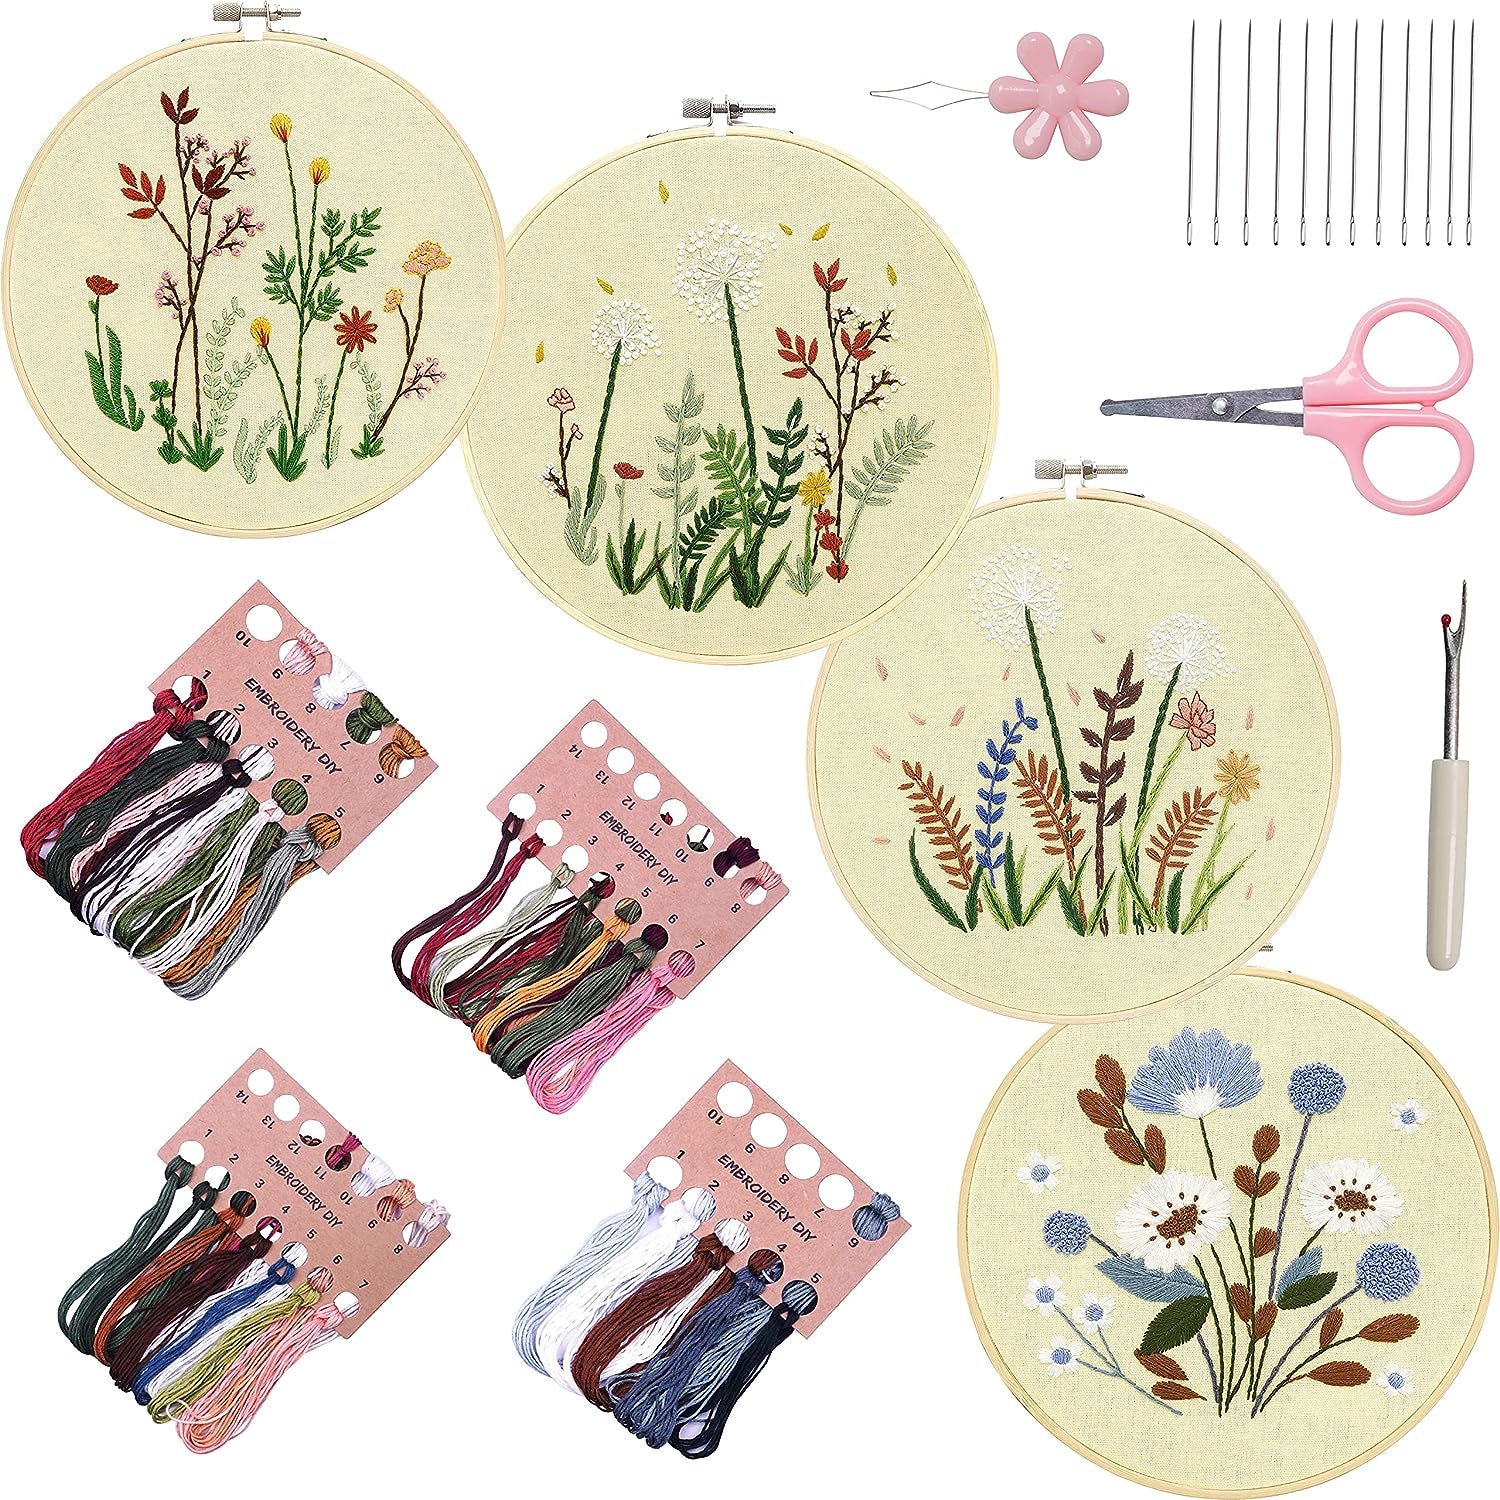 4 Sets Embroidery Kit for Beginners Art Craft Handy Sewing Include  Embroidery Clothes with Pattern, Hoops, Instructions,Color Threads Needle  Kit (Multi 1)